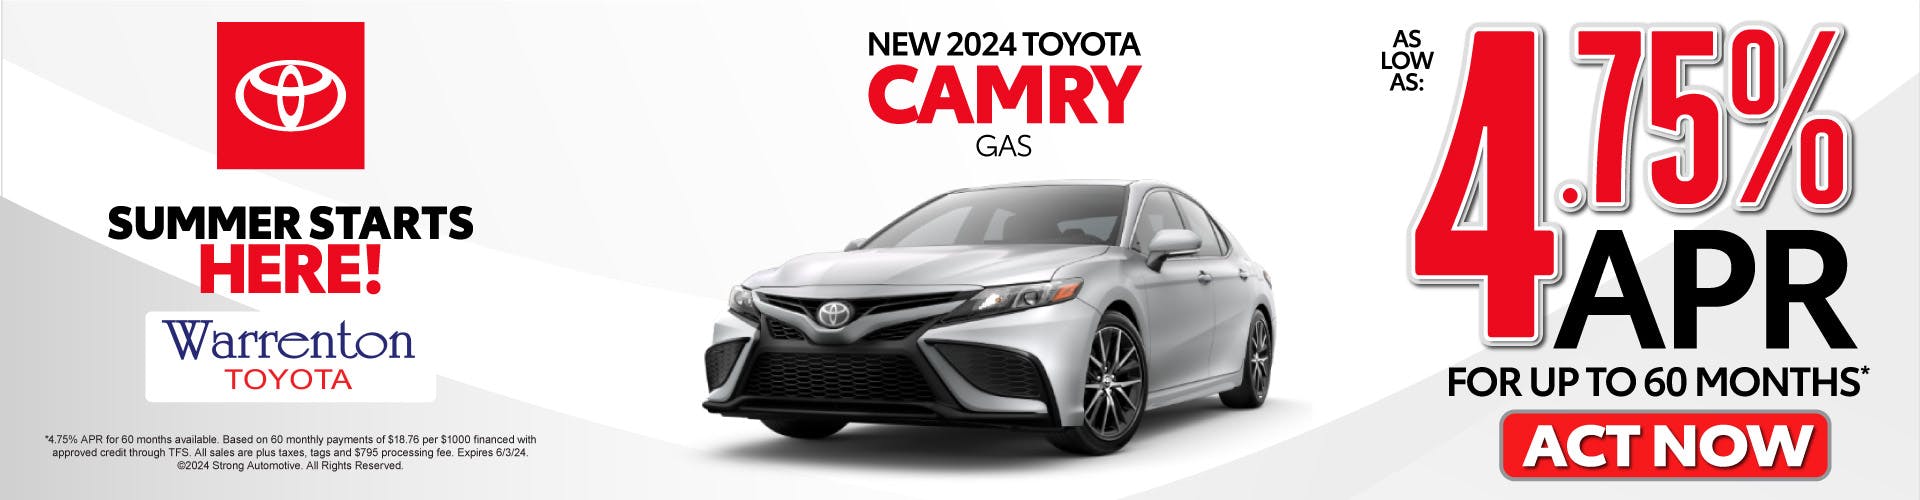 New 2024 Toyota Camry Gas – As Low as 4.75% APR for up to 60 months* – Act Now